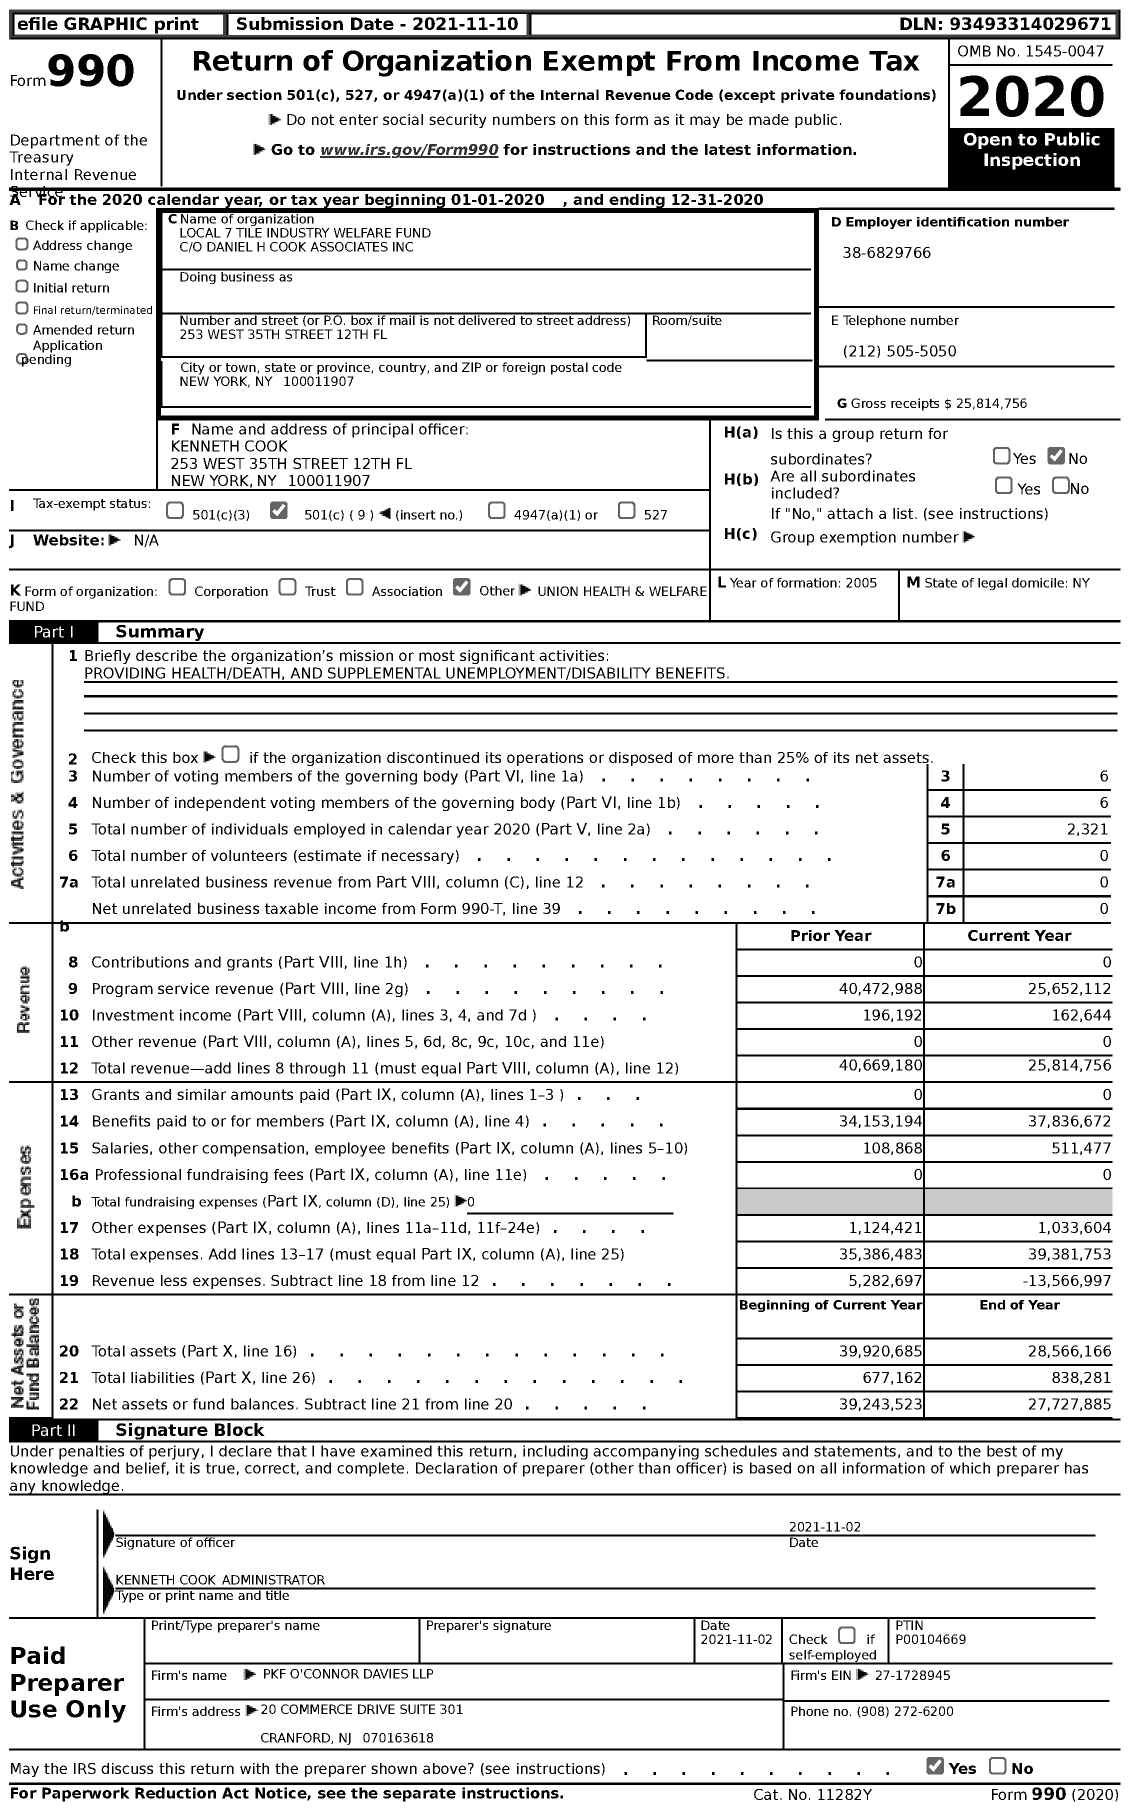 Image of first page of 2020 Form 990 for Local 7 Tile Industry Welfare Fund